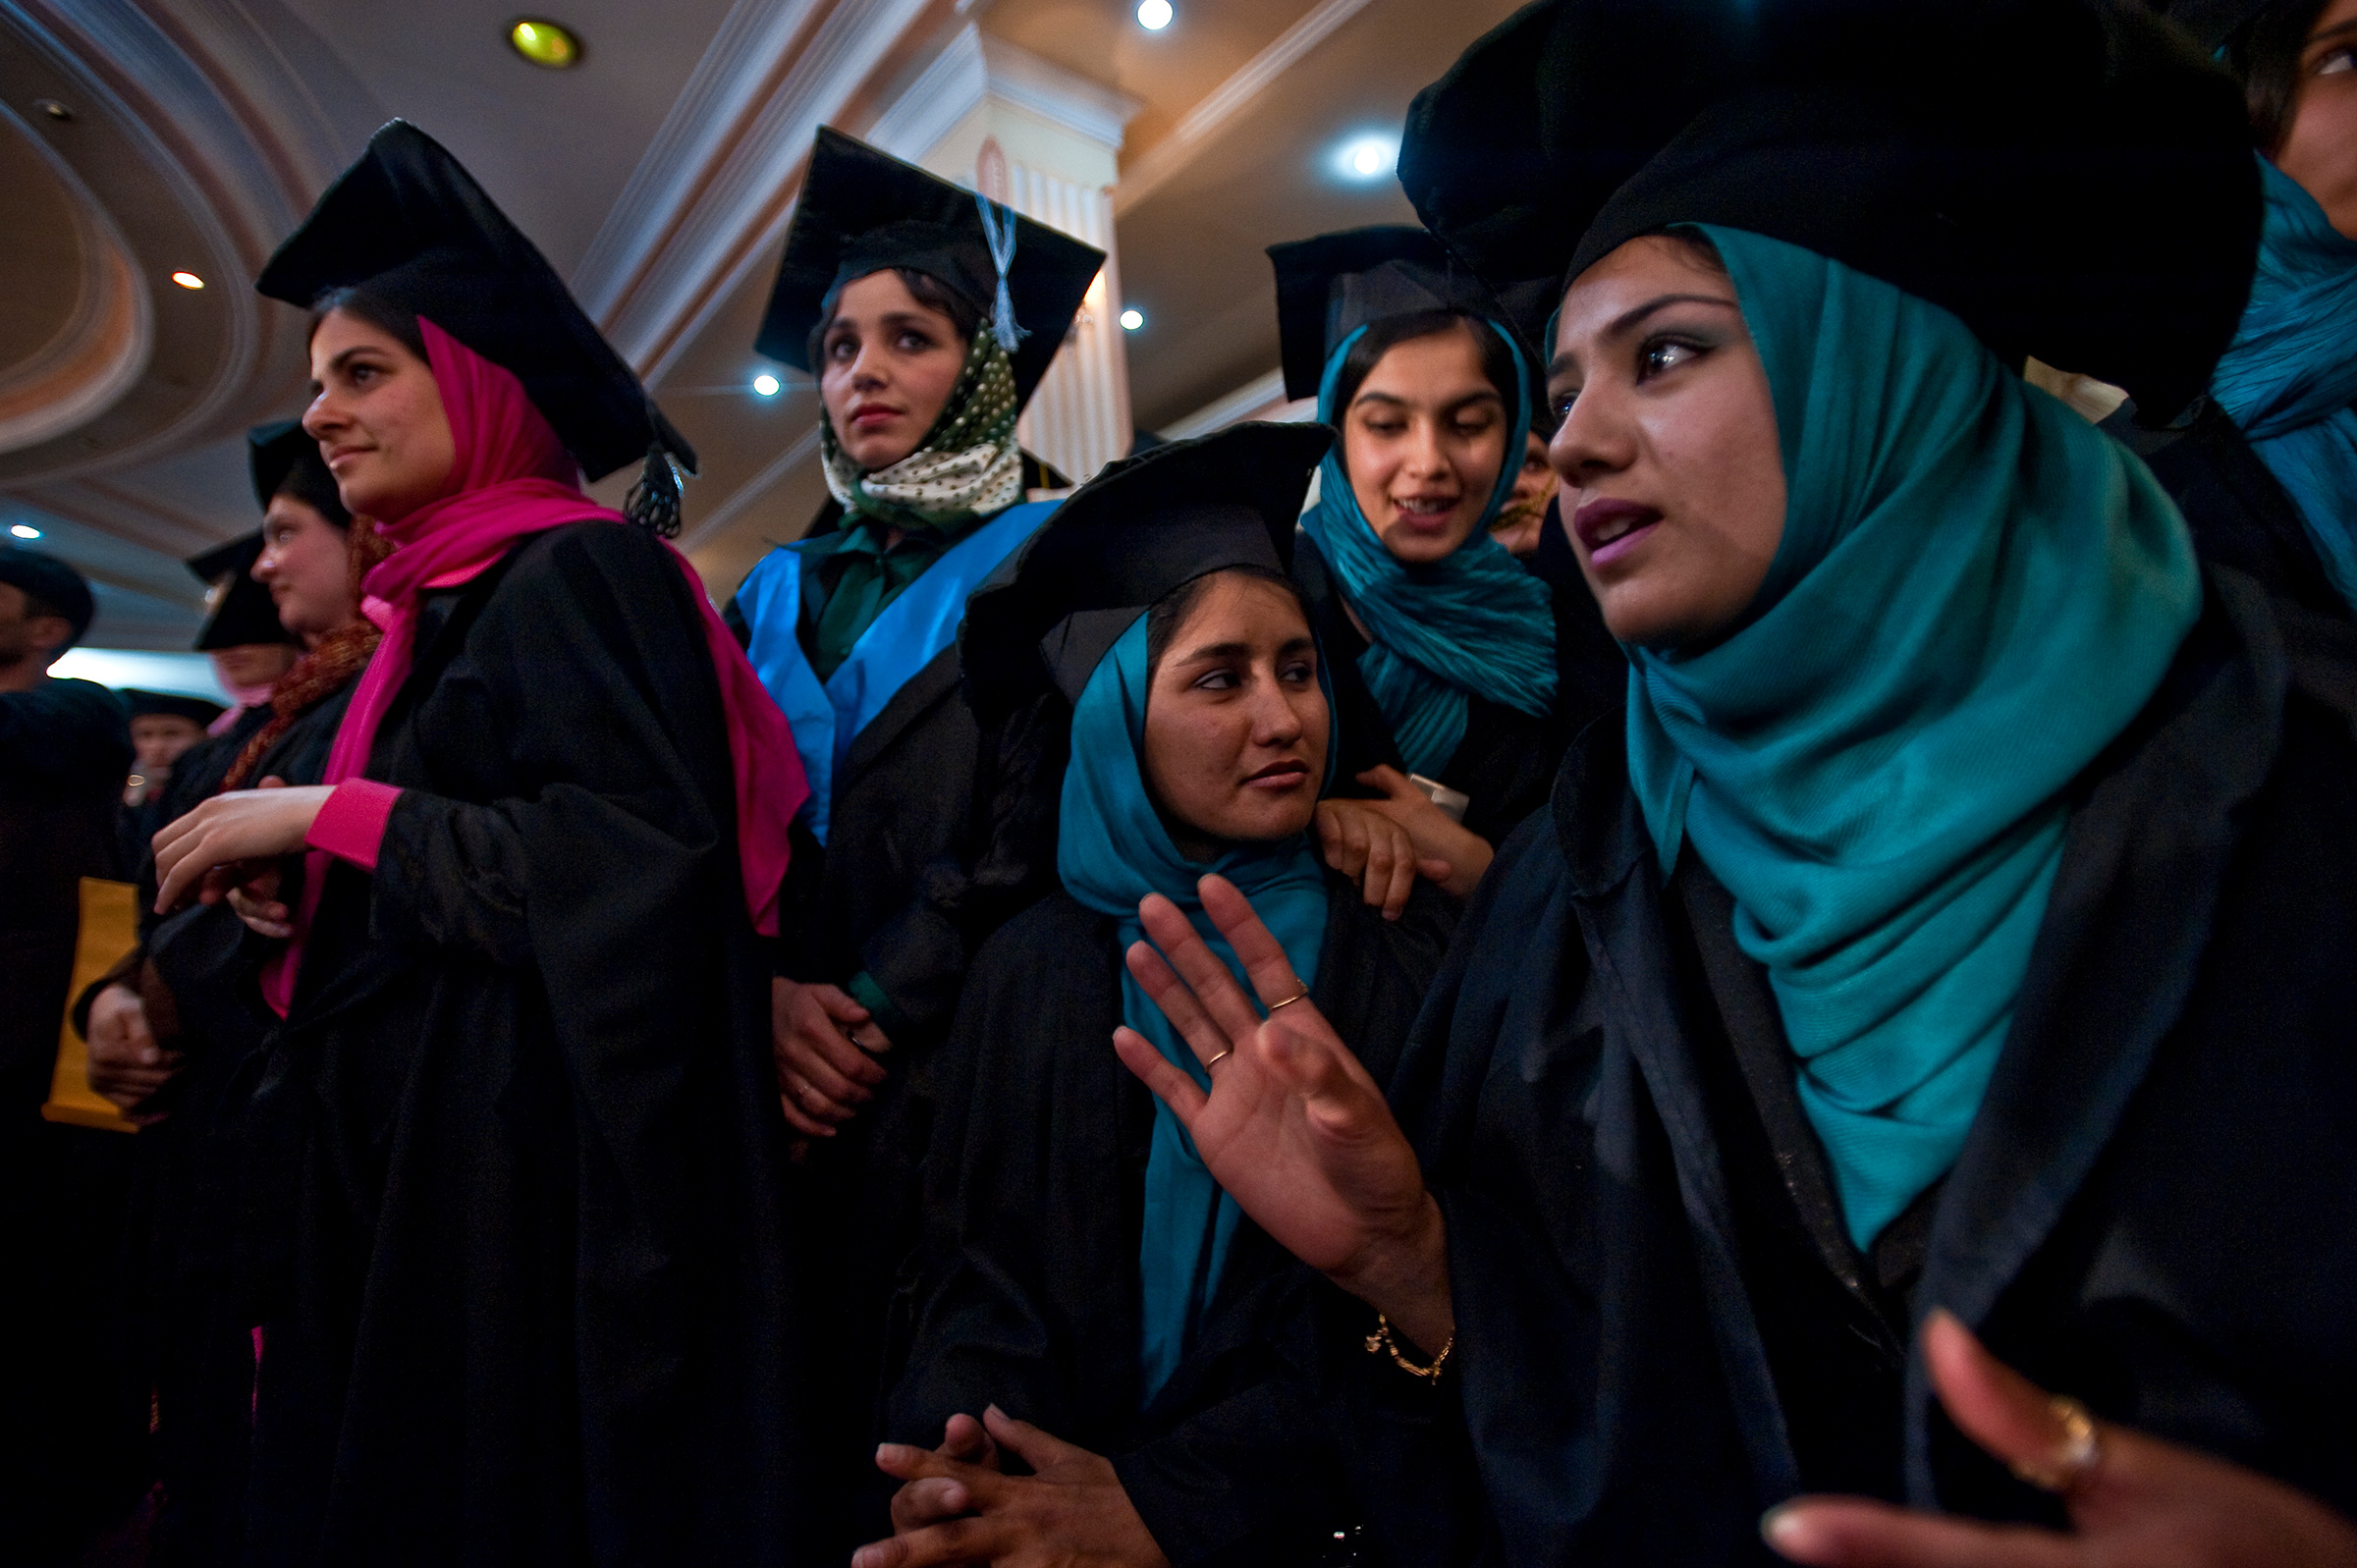 Wearing hijab under their mortarboards and seated in separate rows from their male peers, the women pictured are members of Kabul University's class of 2010 and graduates of the department of language and literature. This graduation was held under tight security at a hotel in Kabul because of an upsurge in terrorist attacks.